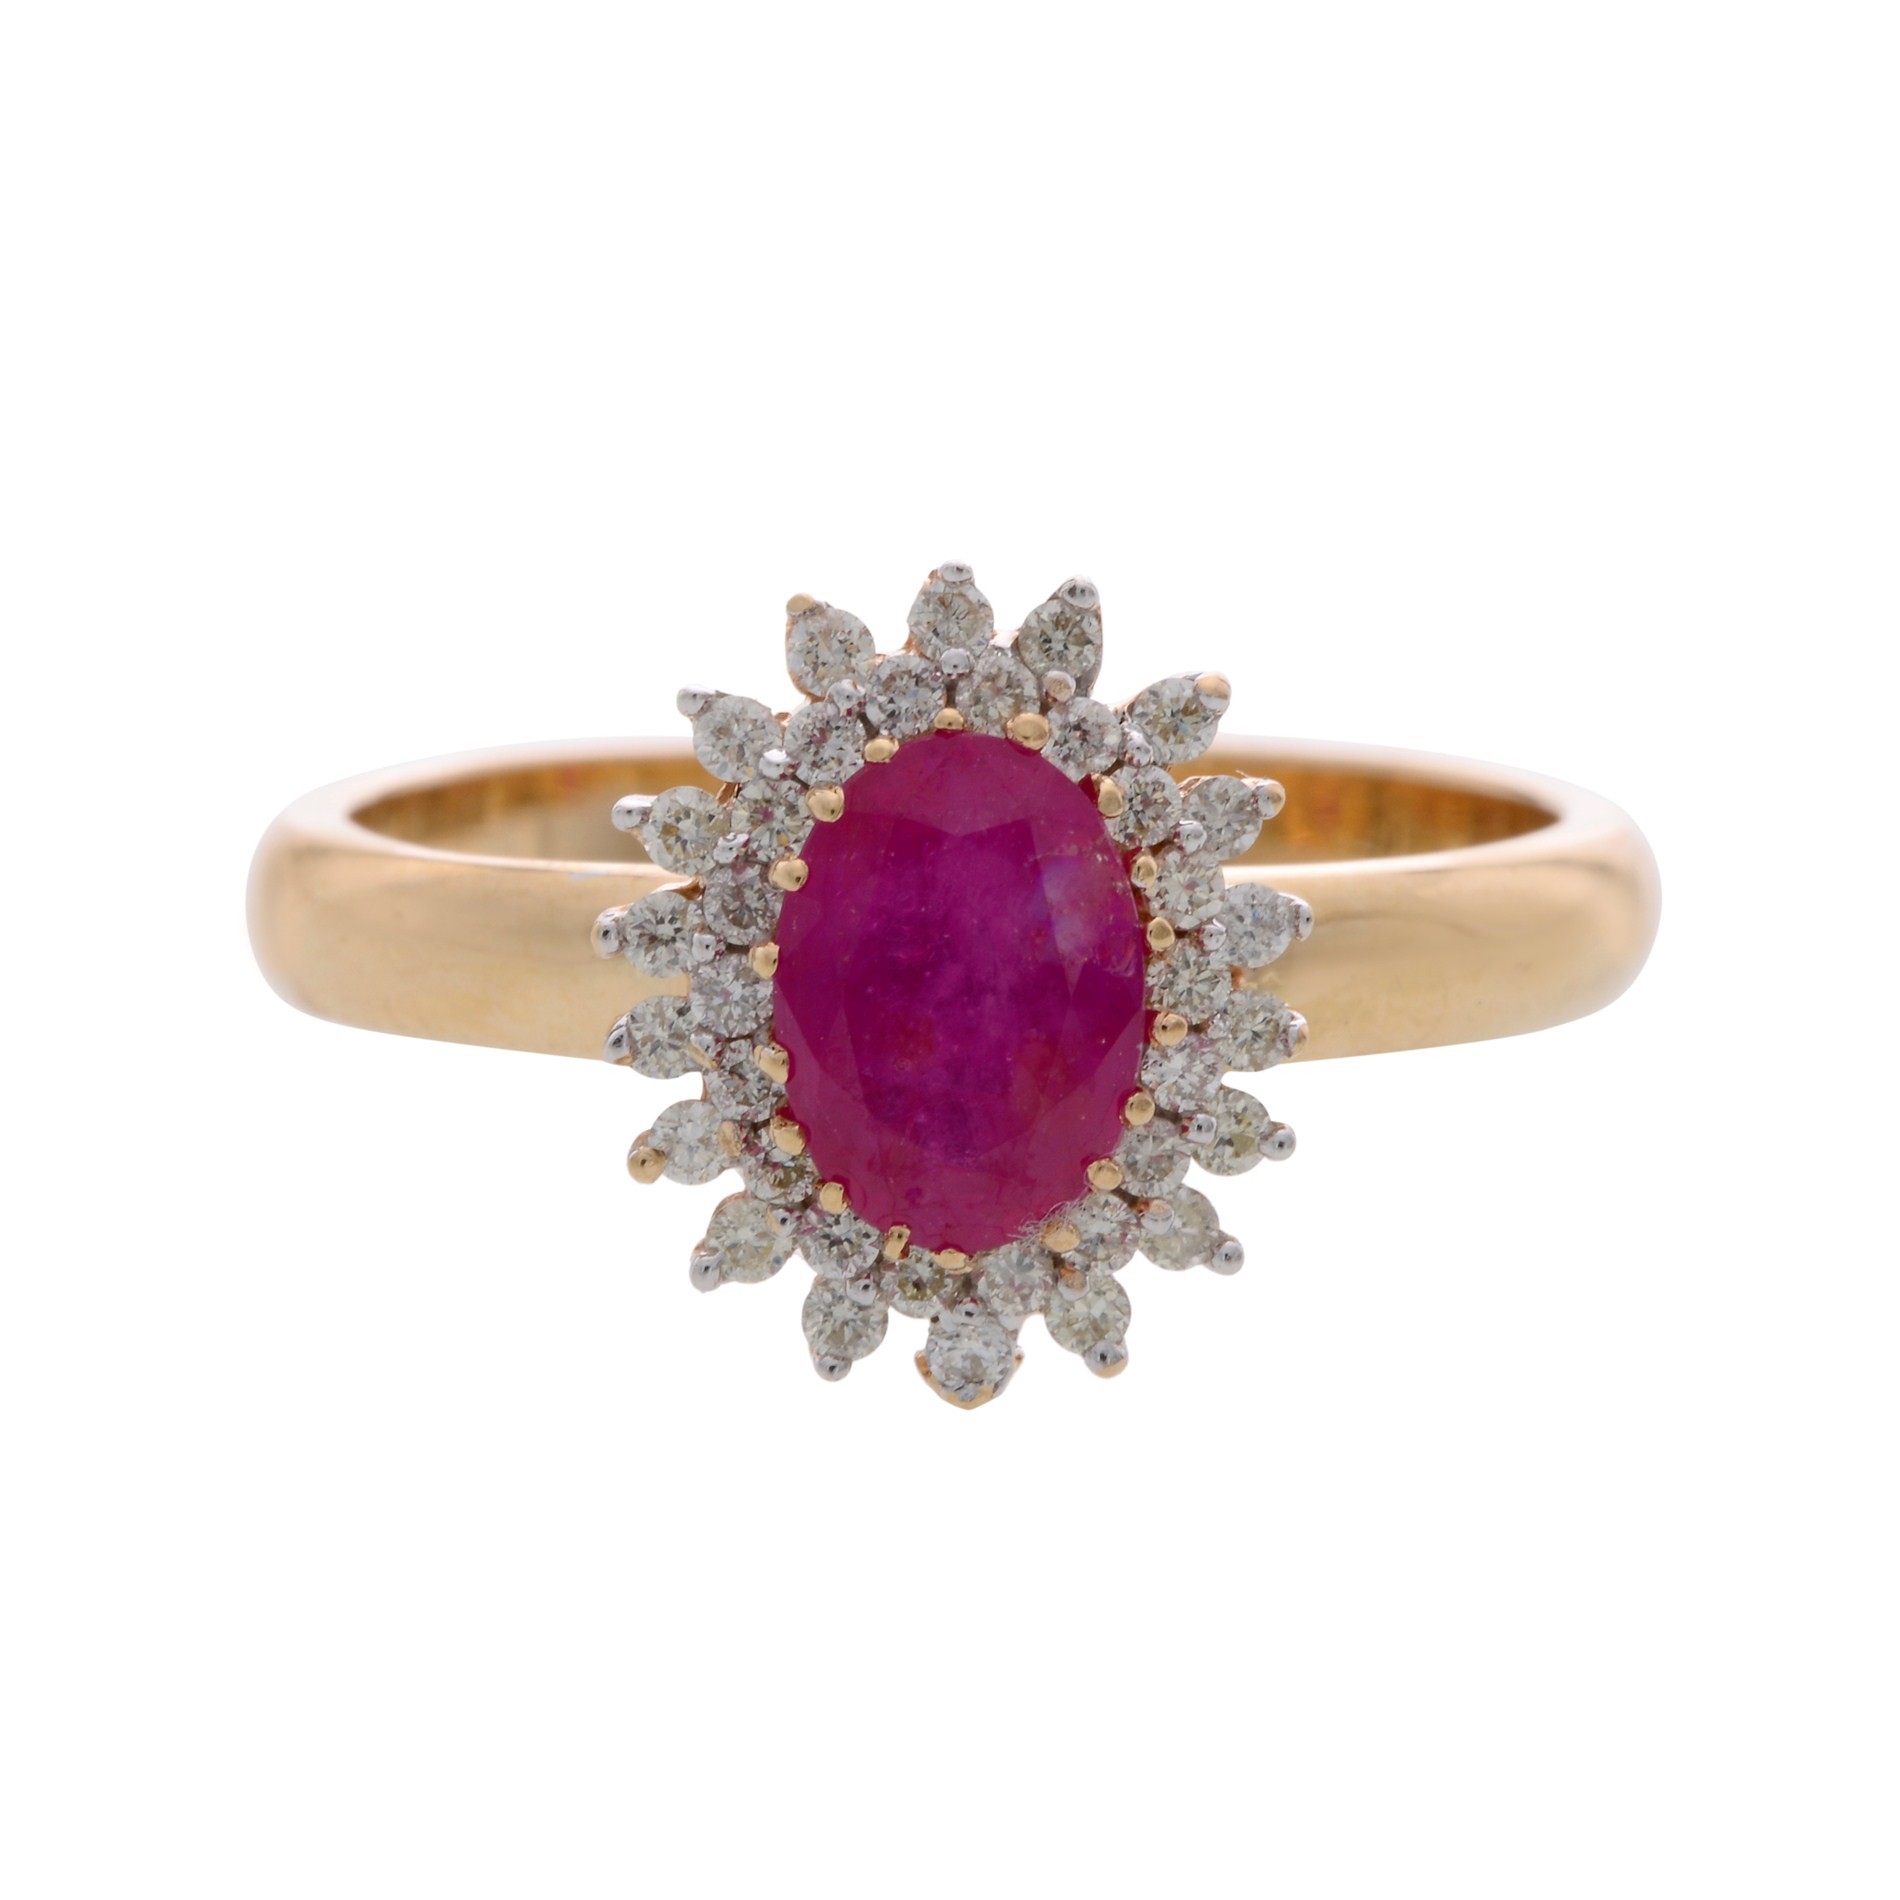 Buy Ruby & Diamonds Finger Ring with 1 stone online